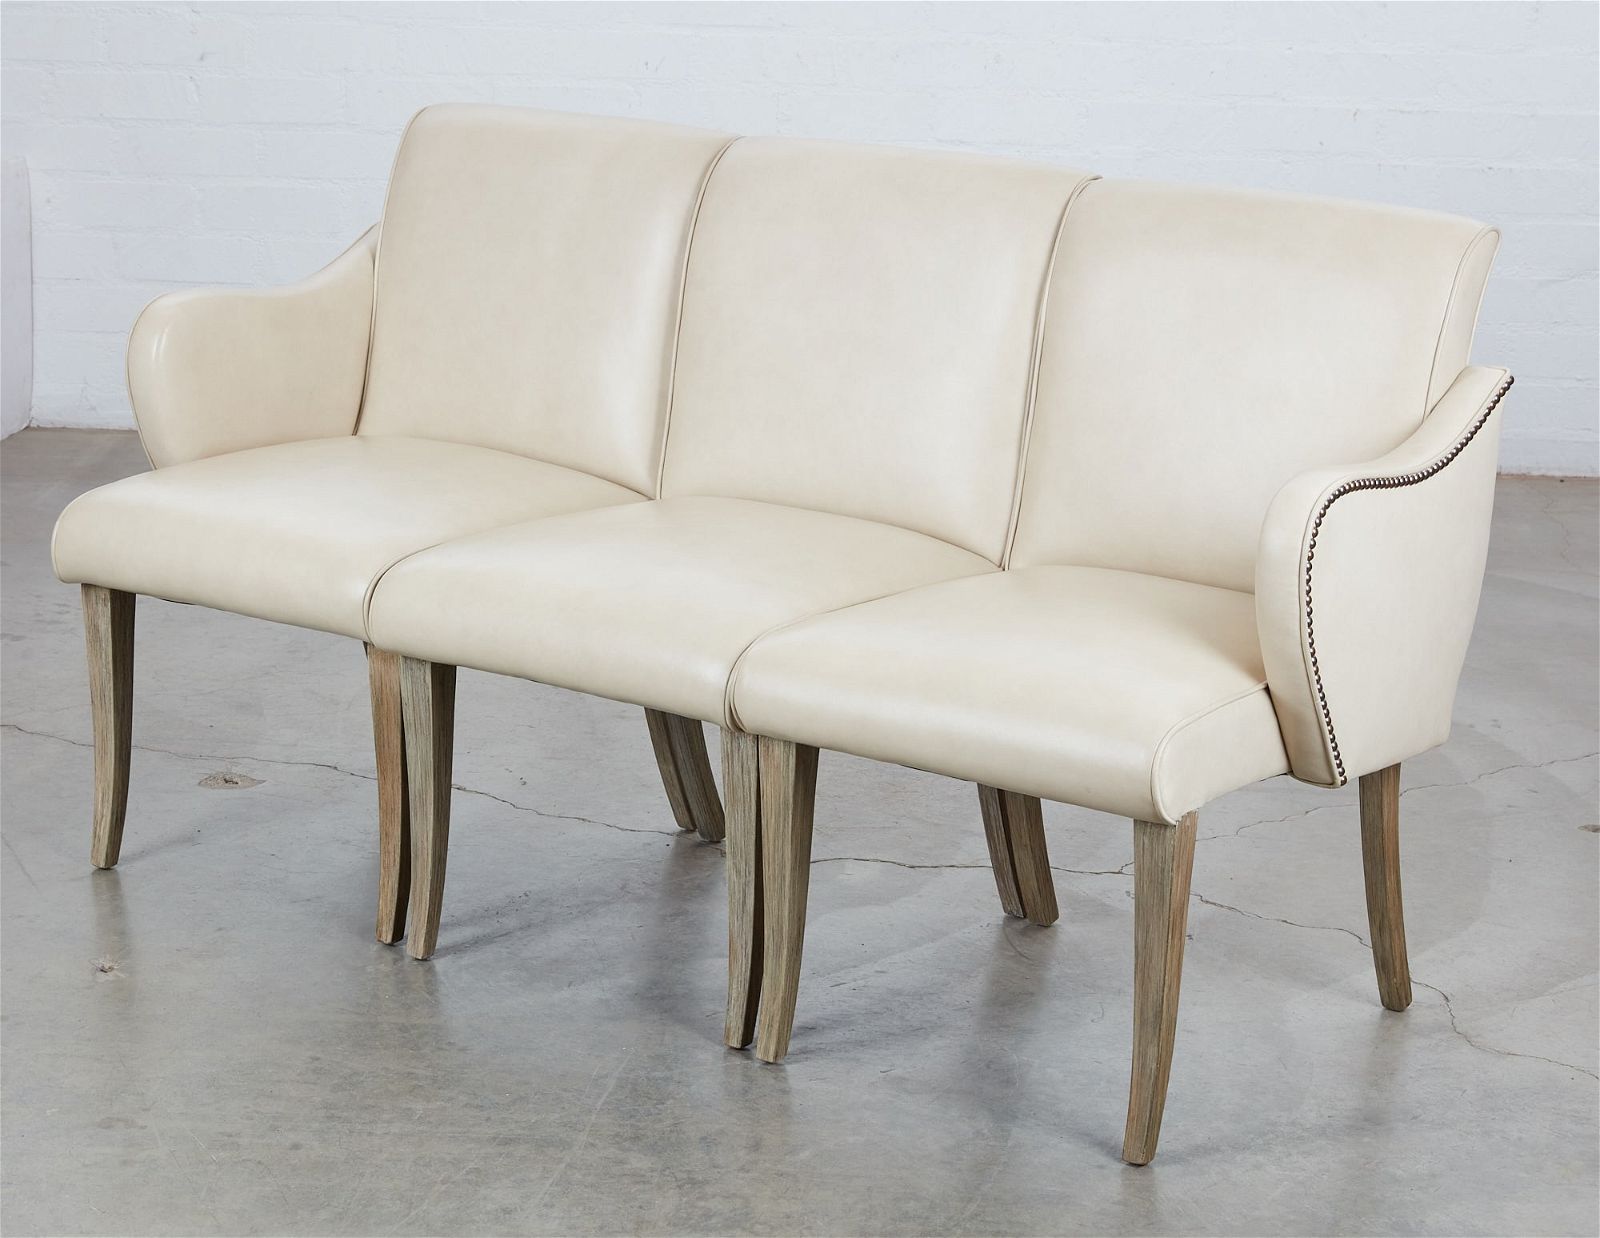 A FRENCH UPHOLSTERED THREE SEAT